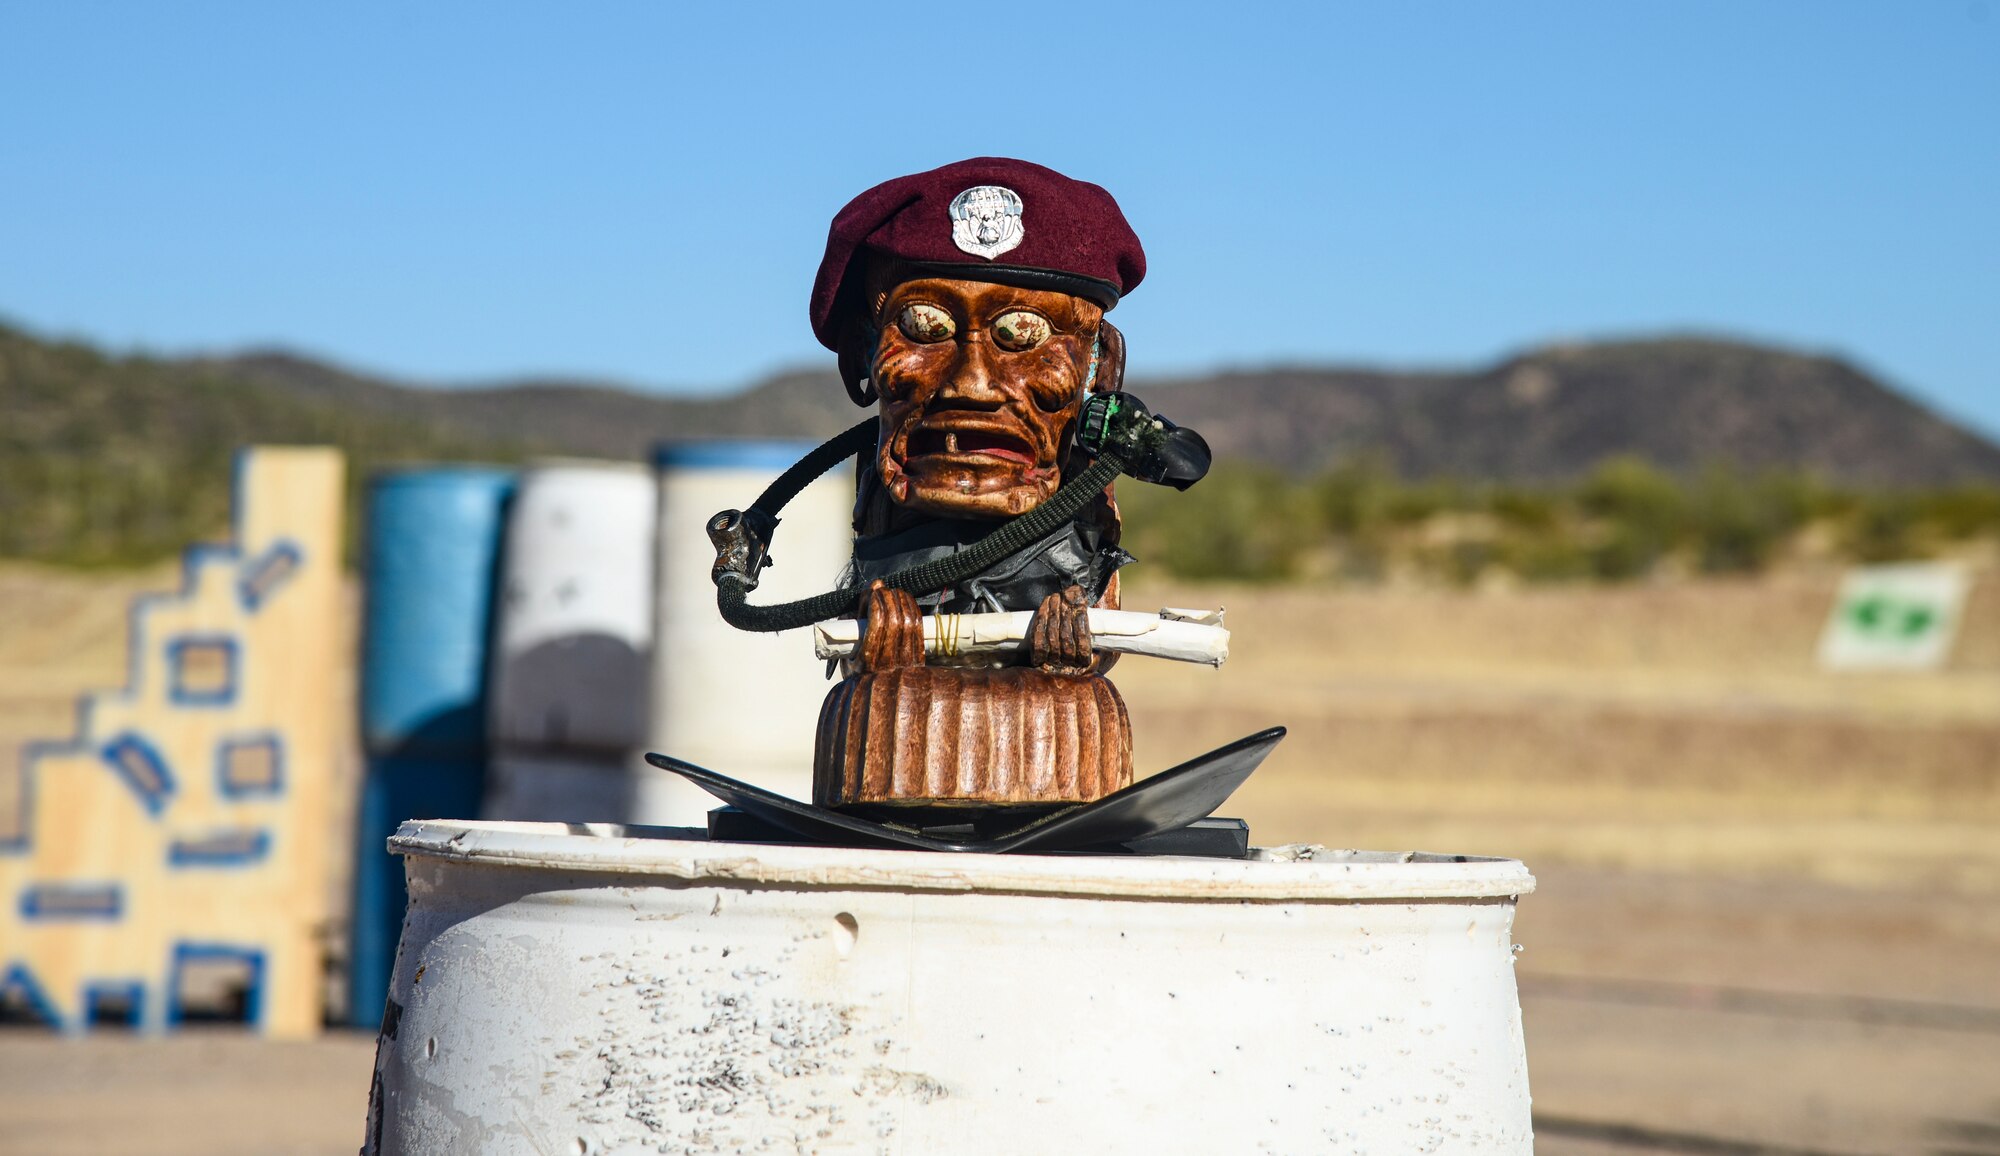 Pictured above is a wooden totem sitting on a plastic barrel.